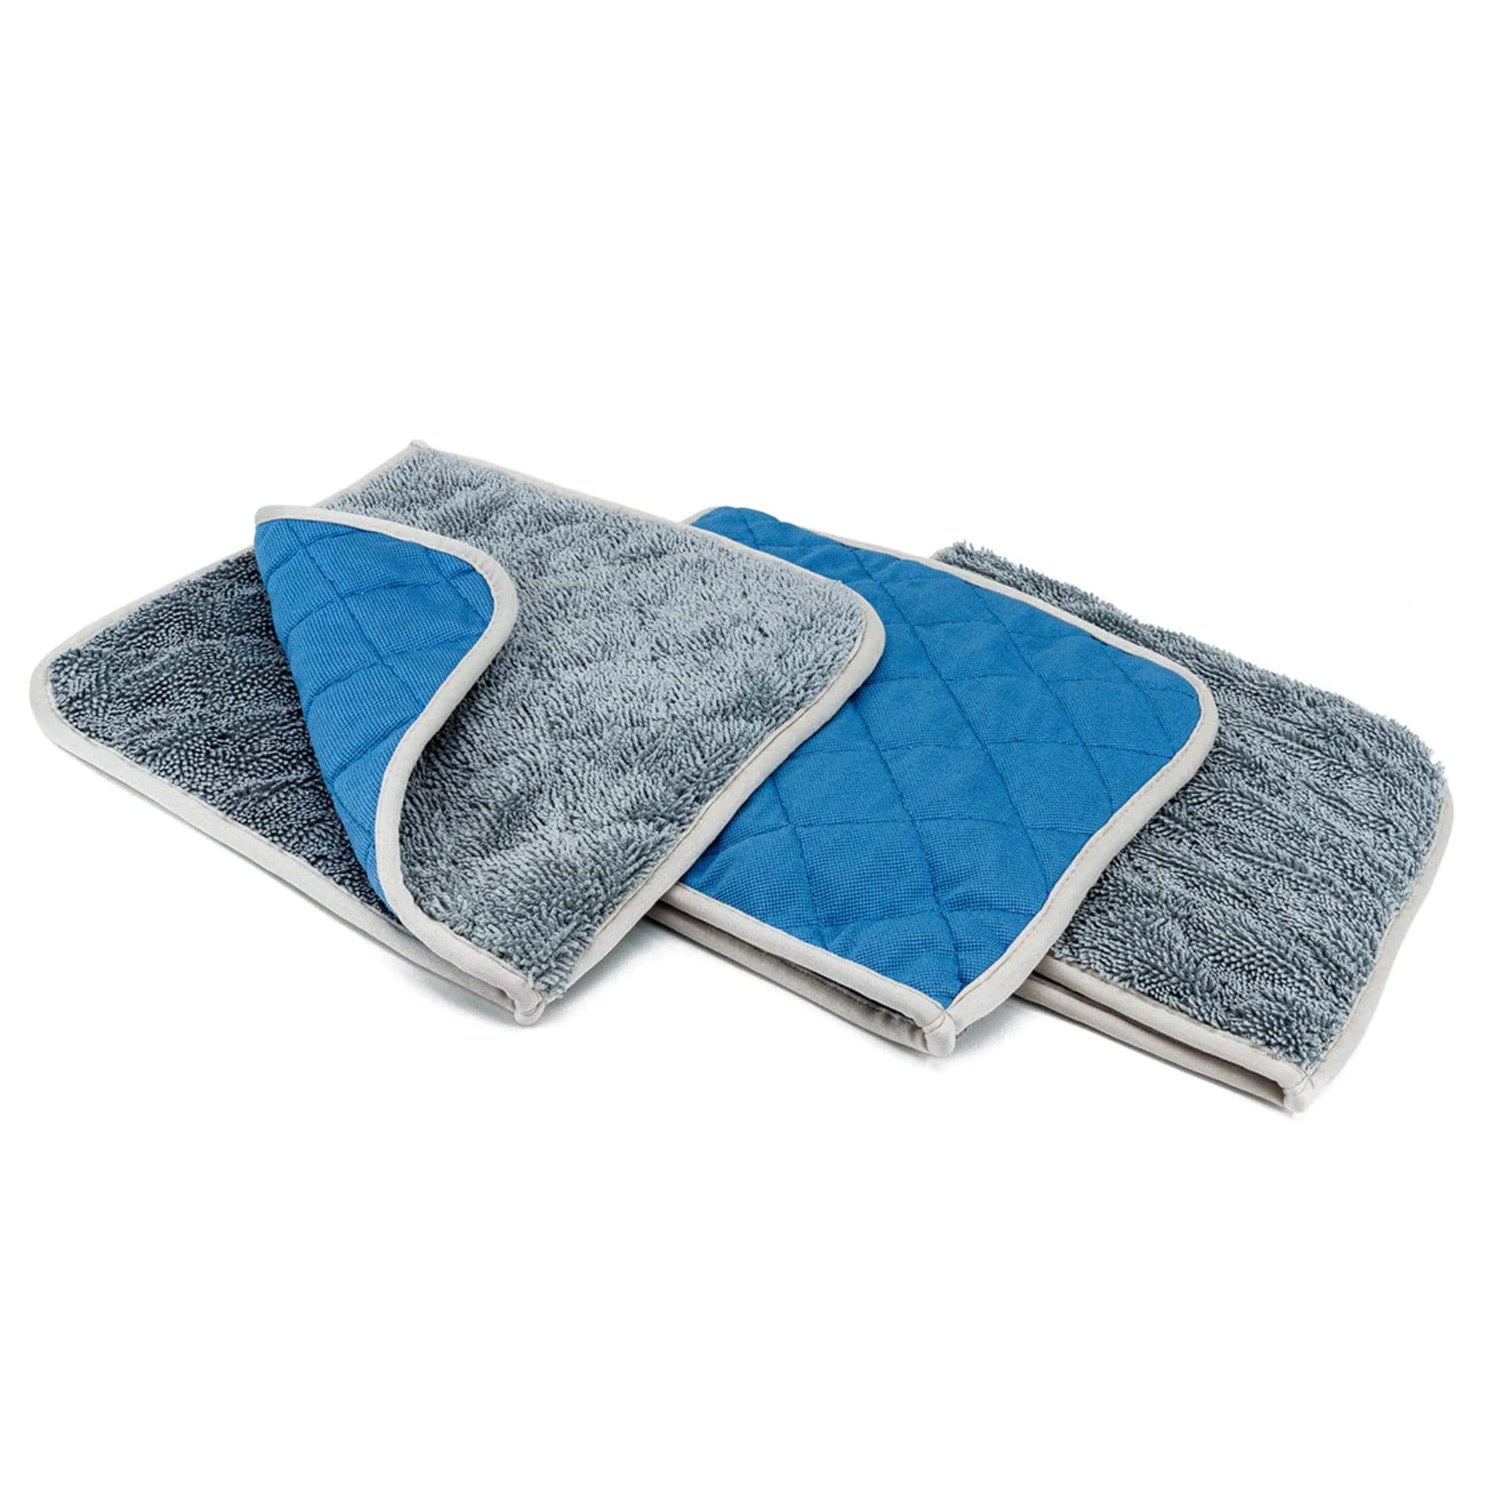 reacher-replacement-towel-3-pack